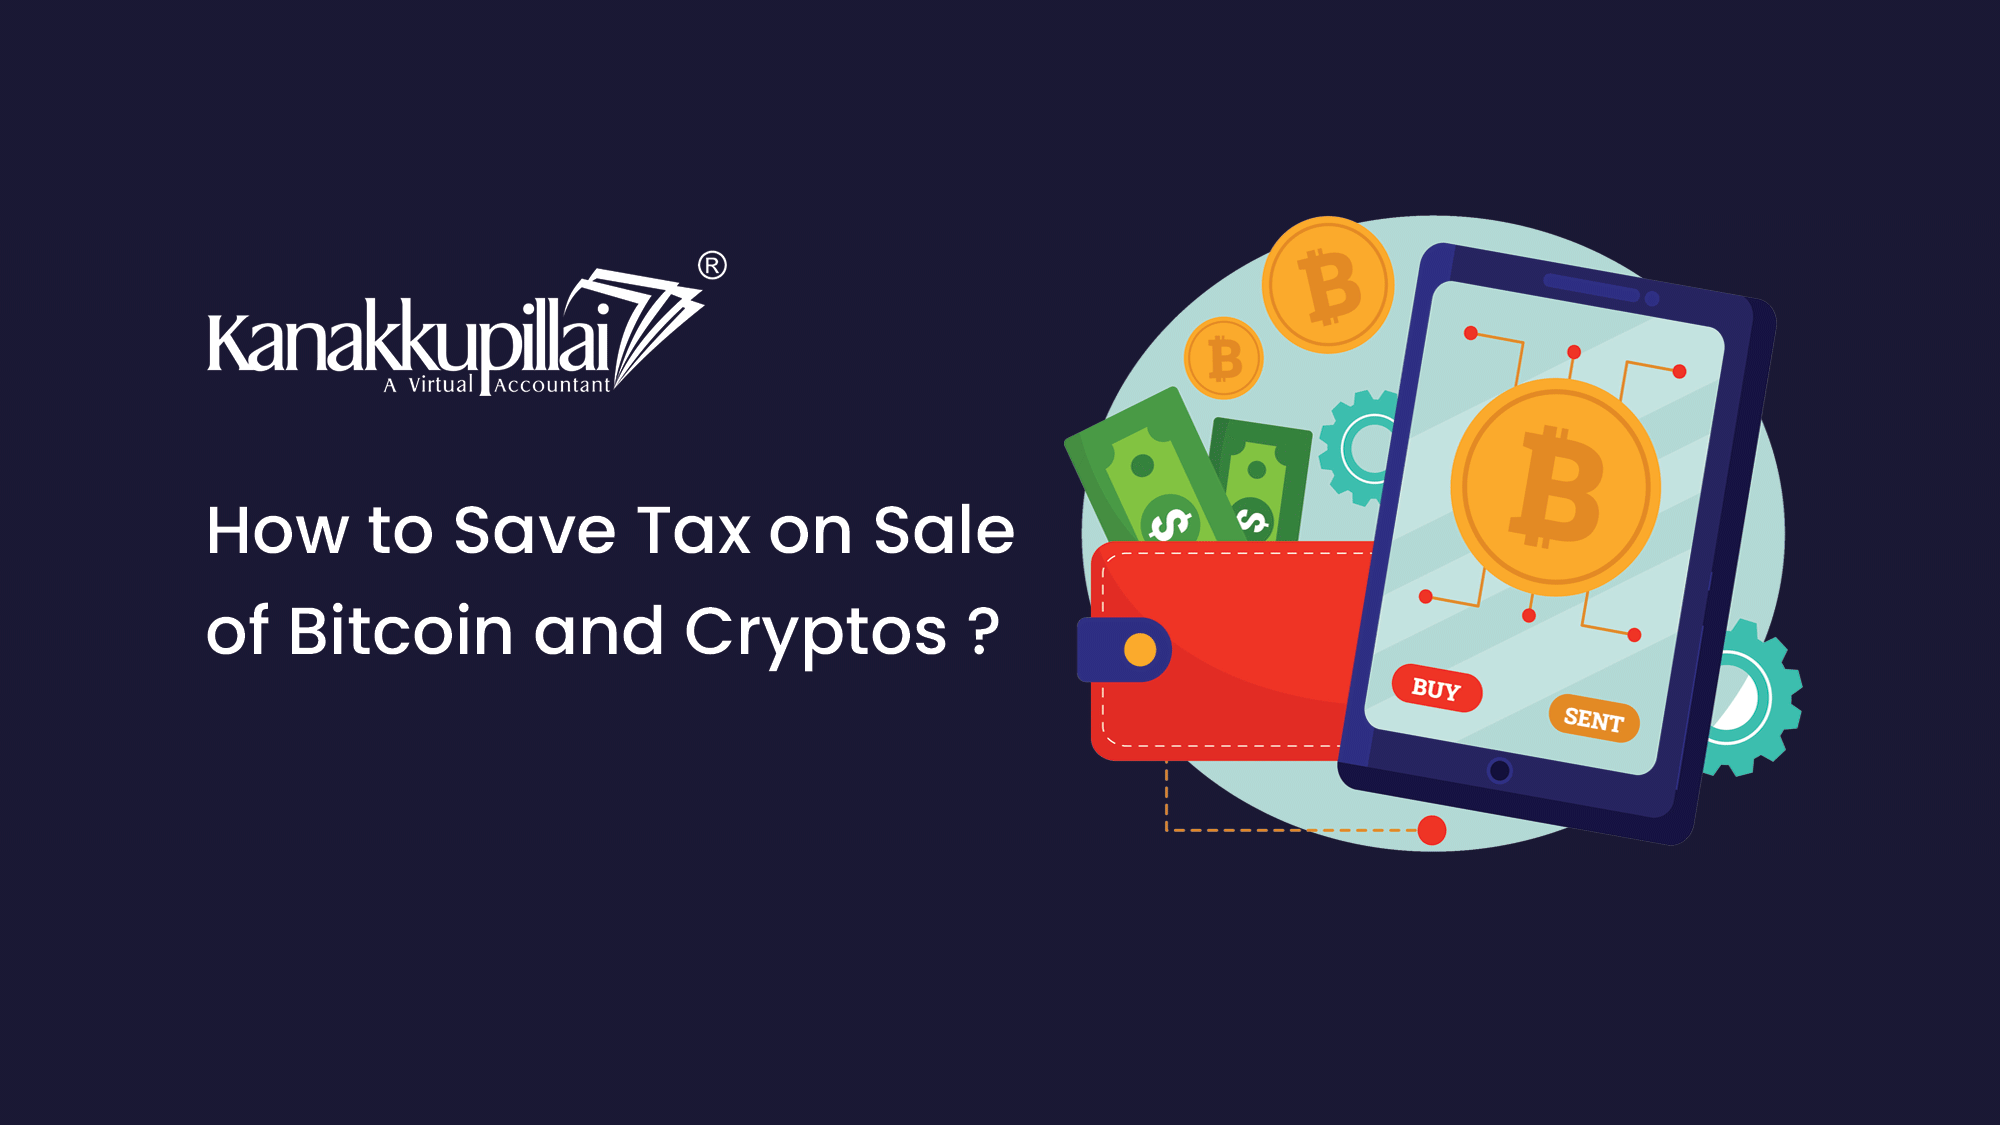 How to Save Tax on Sale of Bitcoin and Cryptos